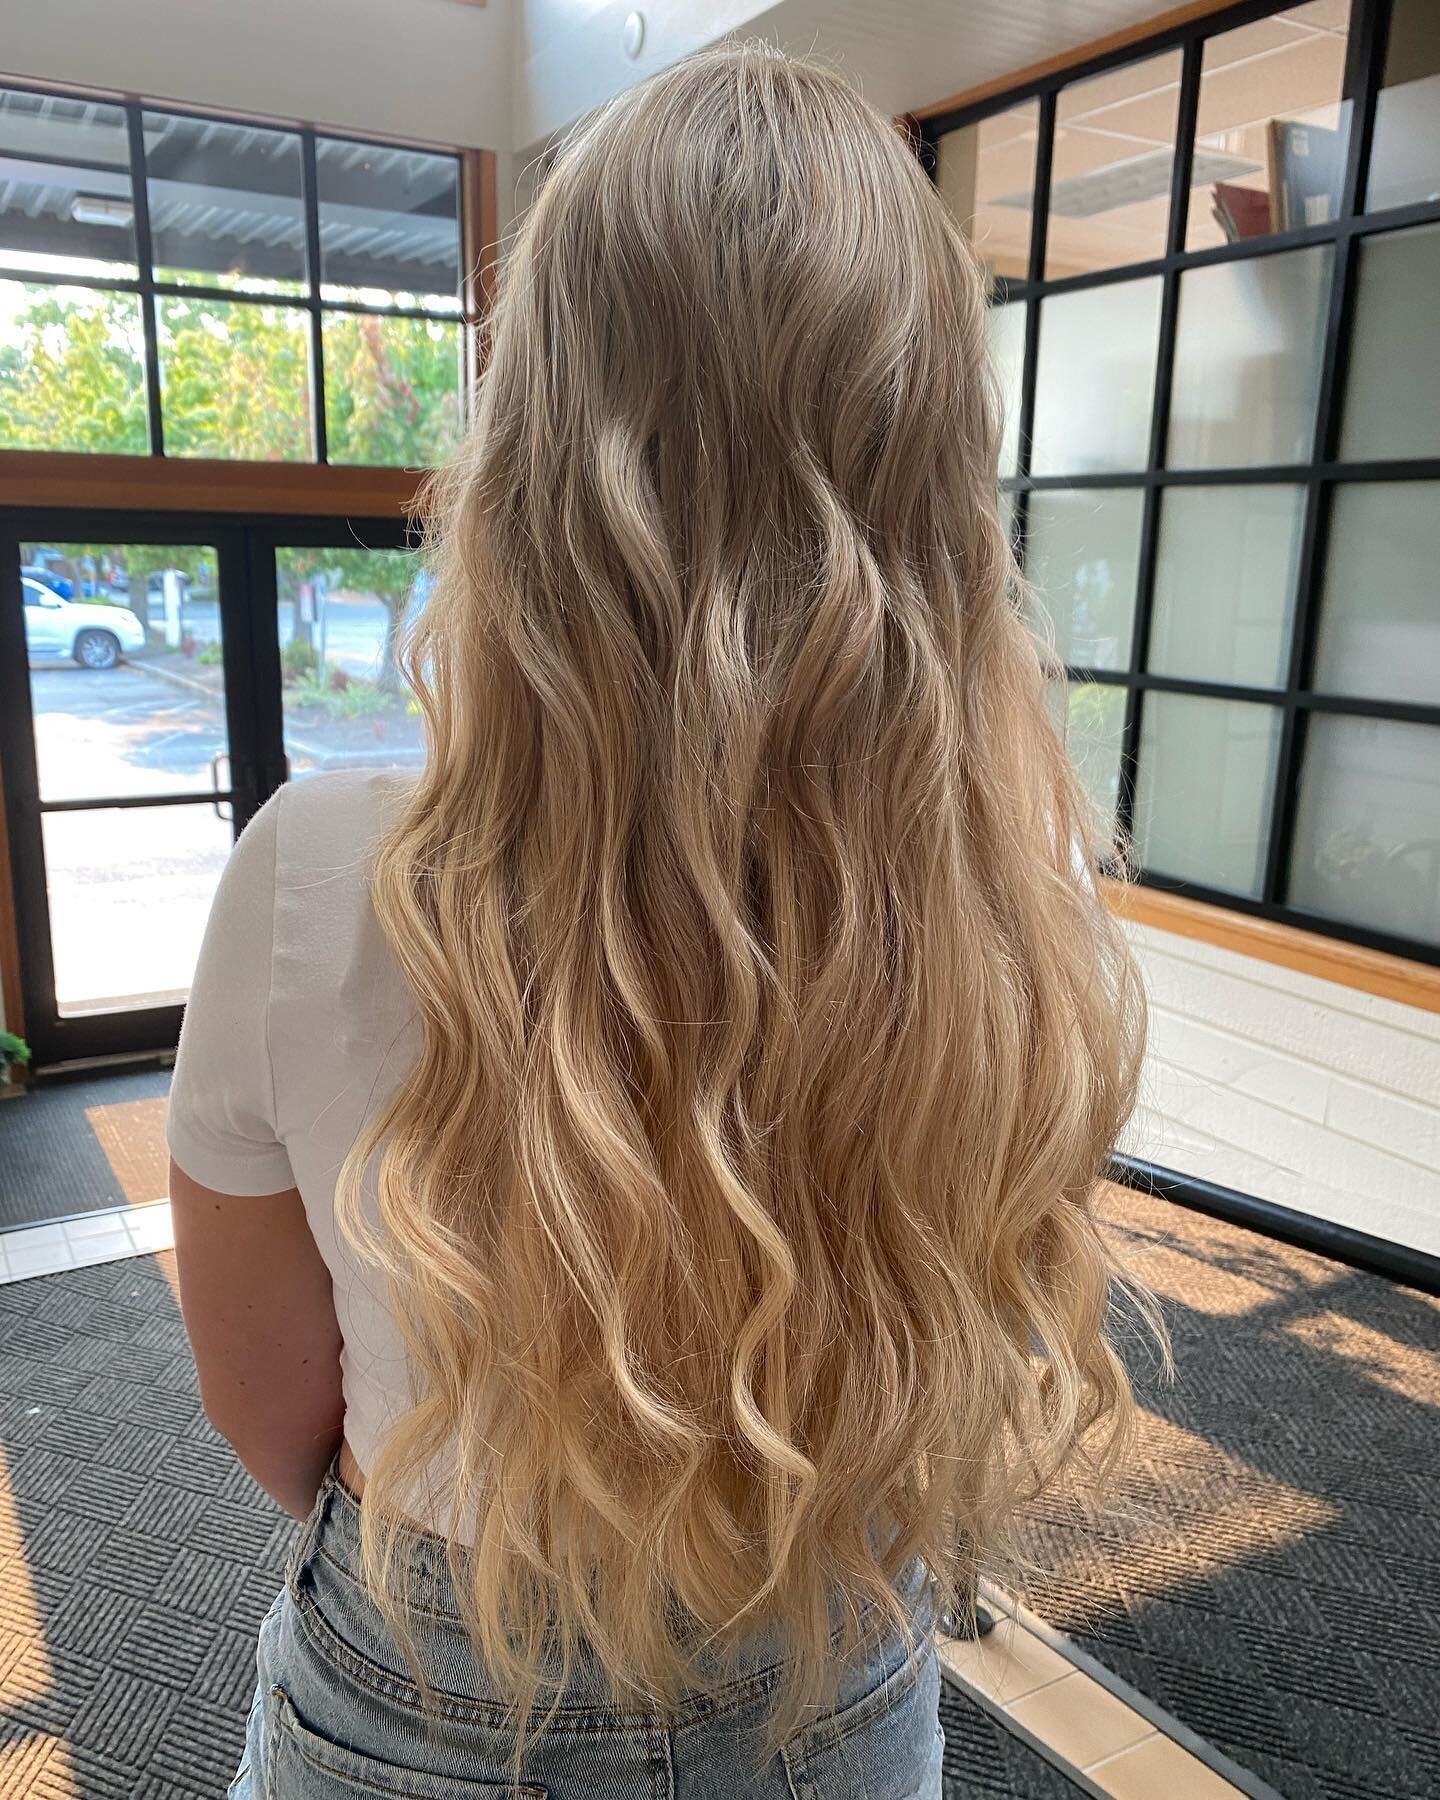 I have been waiting for the right moment to share this ✨GORGEOUS✨ extension makeover on my girl @onceuponafitnessco. We started with a foil, base bump and finished her look with 5 packs of @hotheadshairextensions keraflex extensions. This application